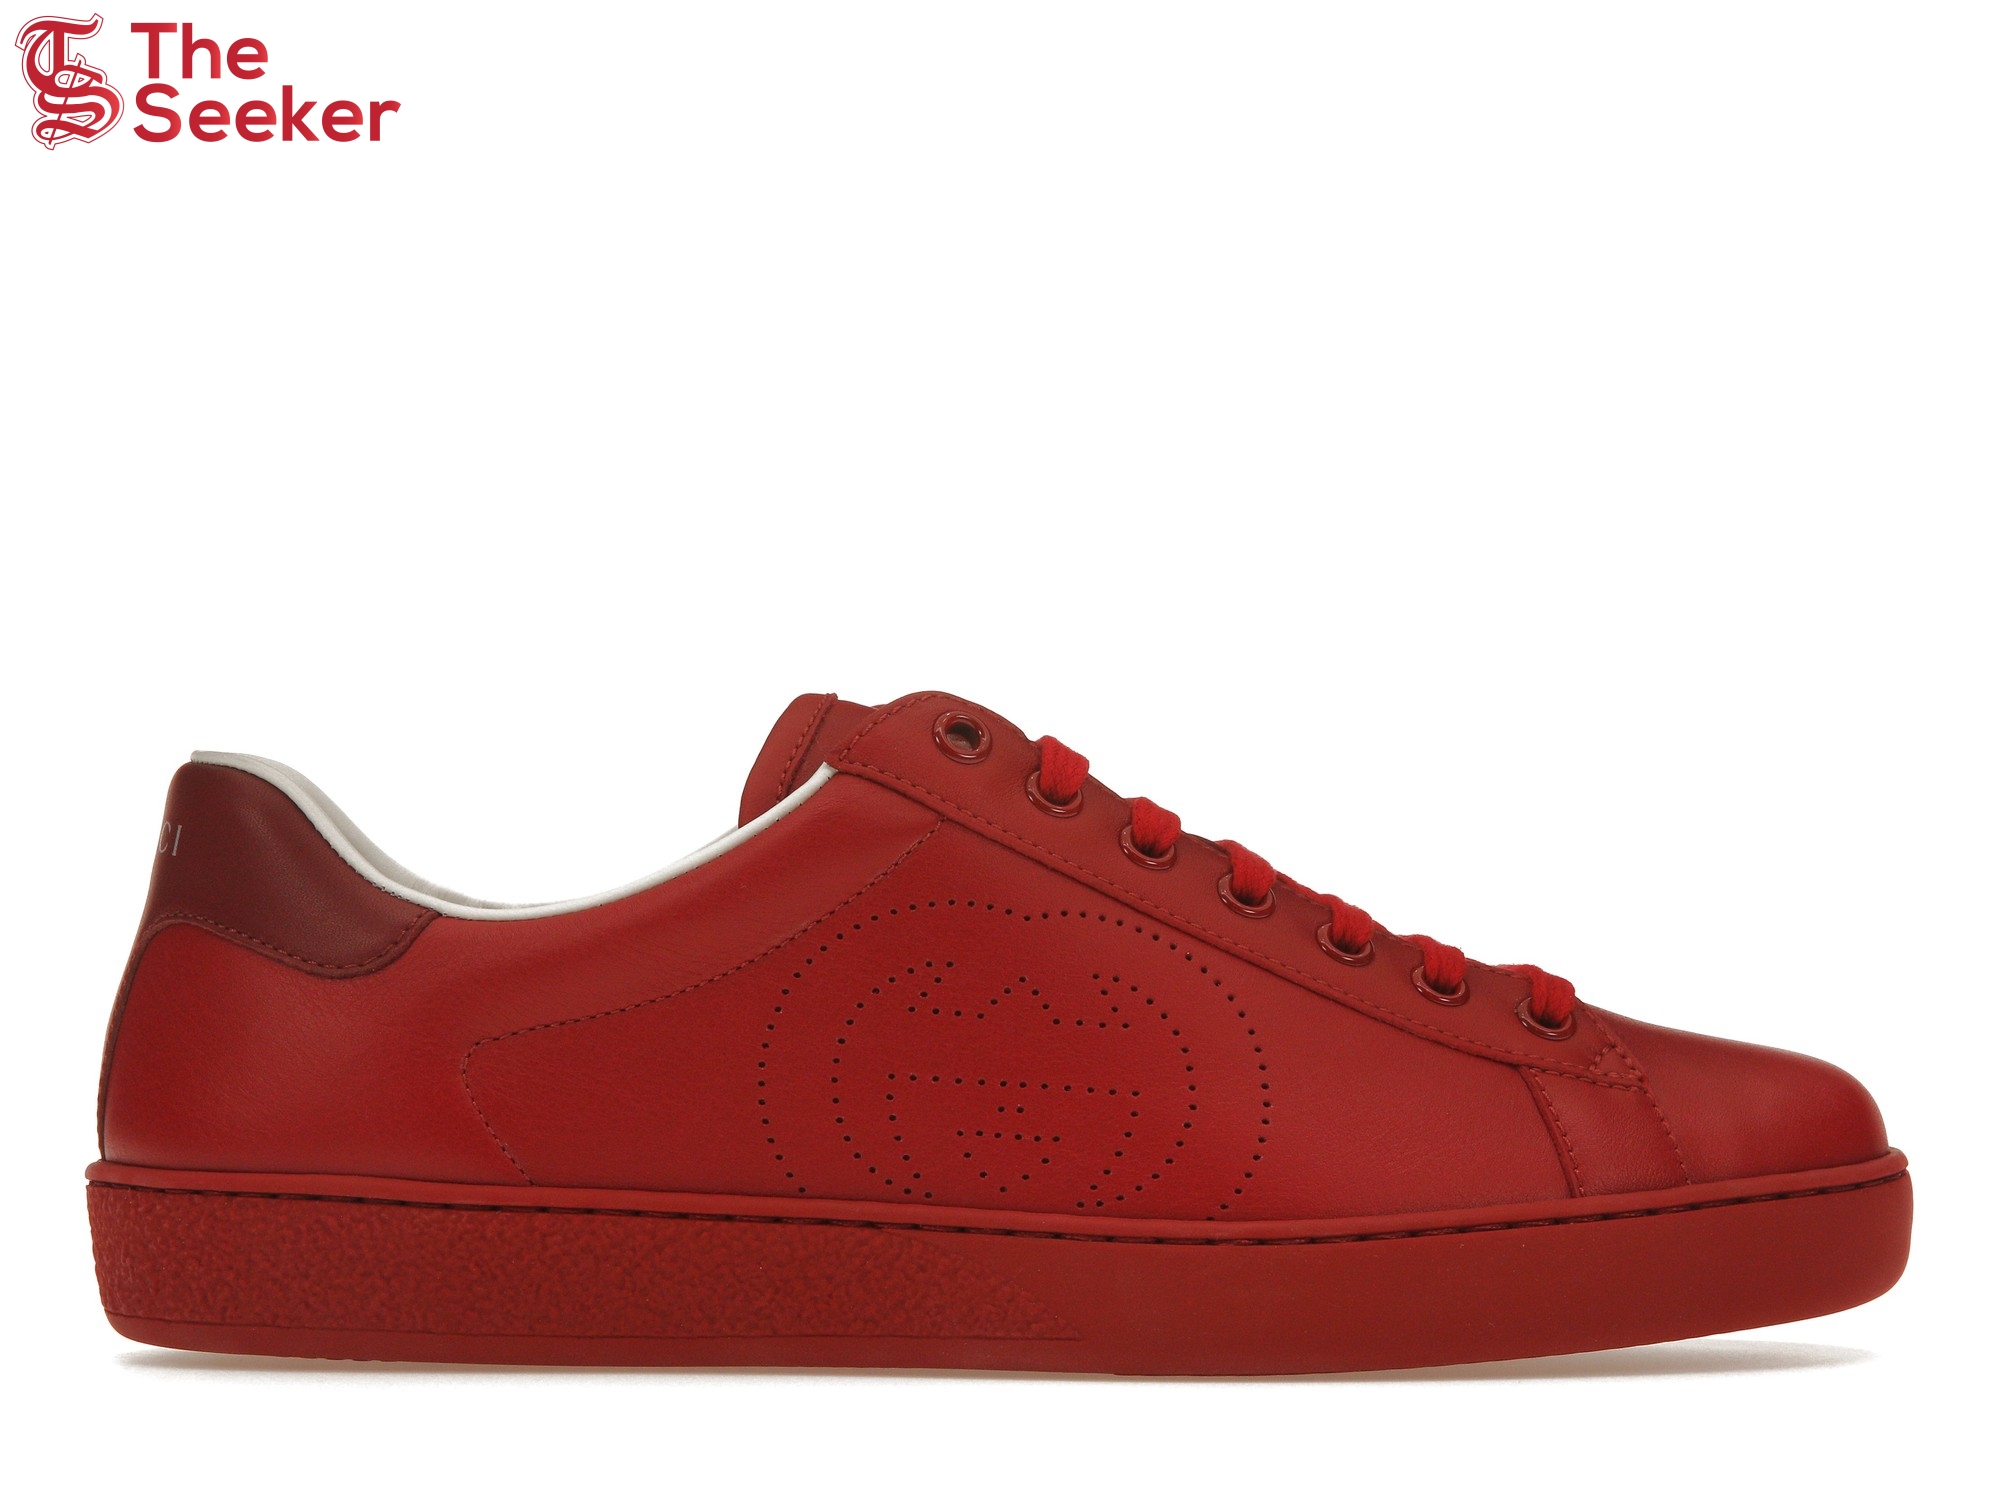 Gucci Ace Perforated Interlocking G Red